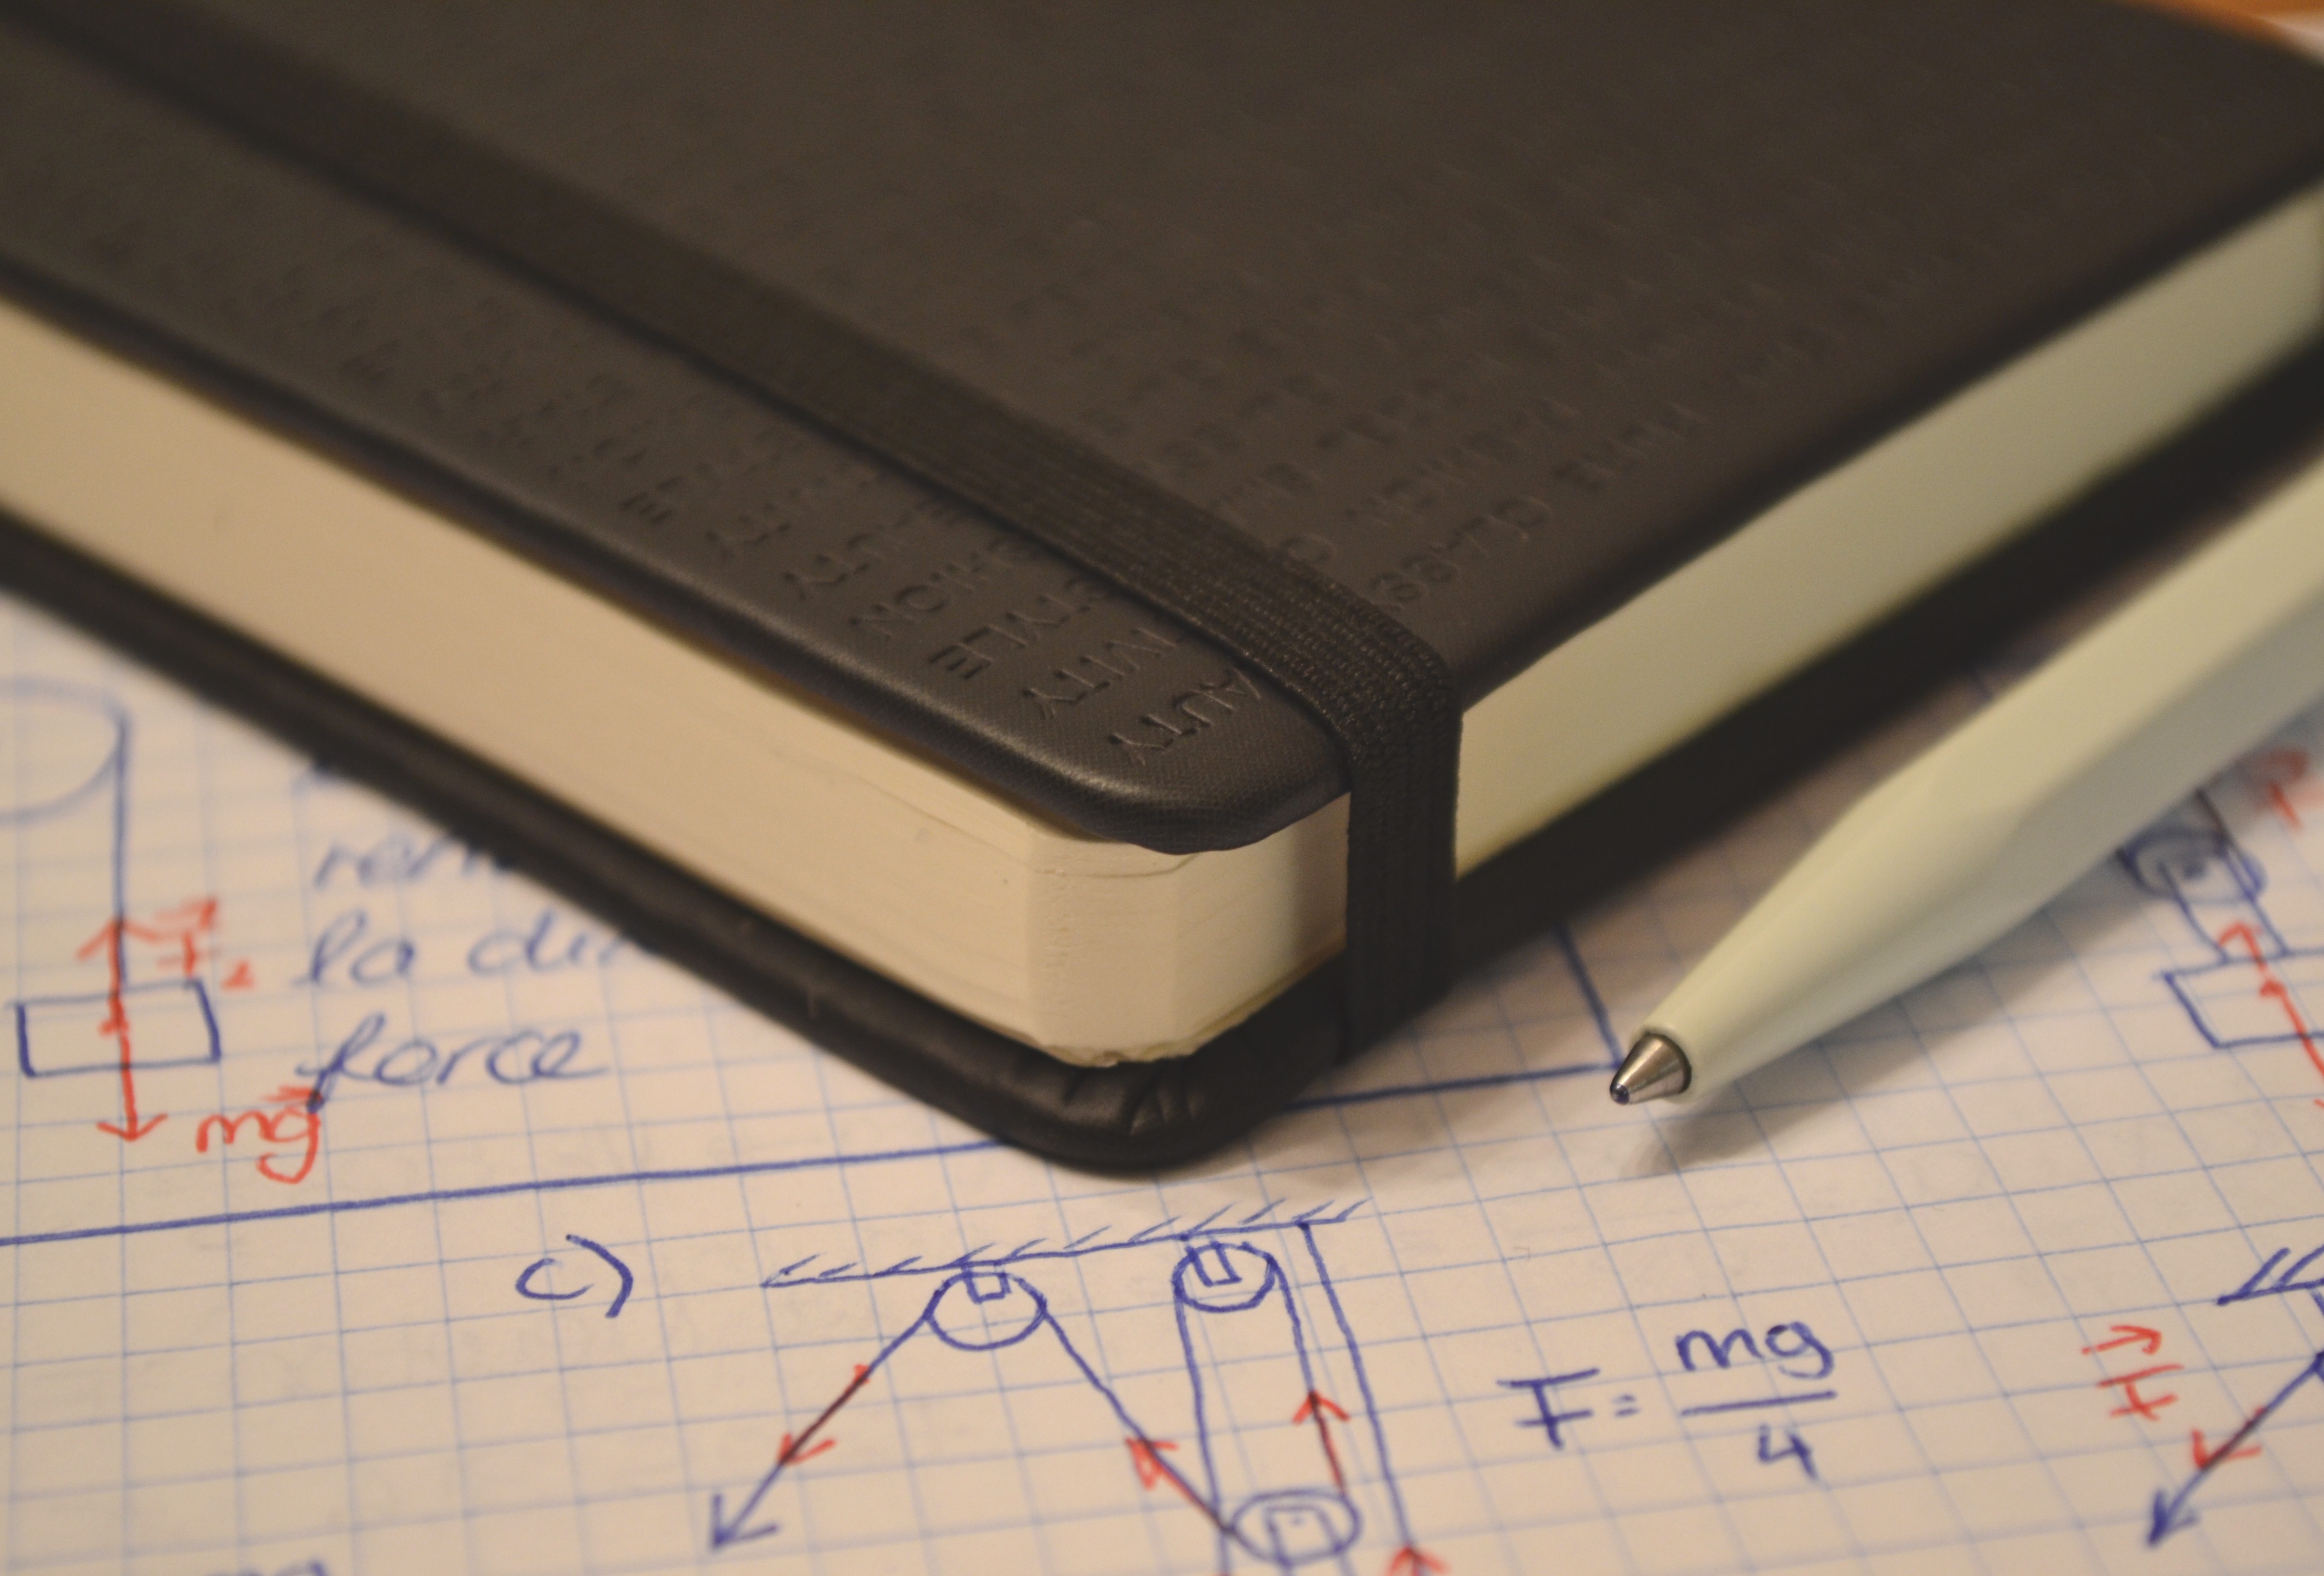 Notebook and pen laying on paper showing physics diagrams